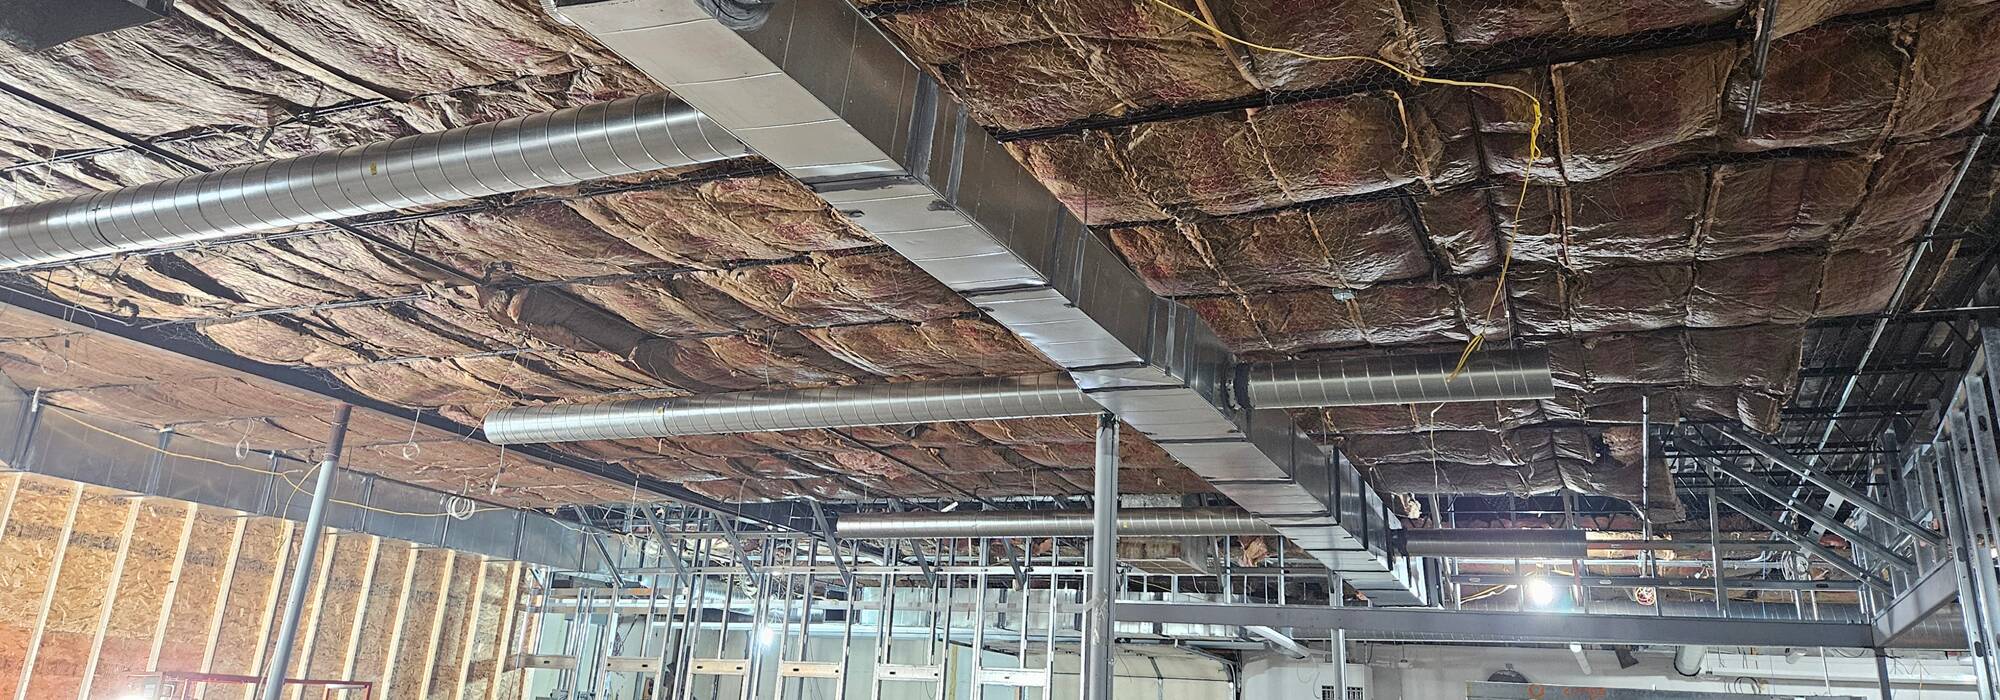 Ductwork during construction